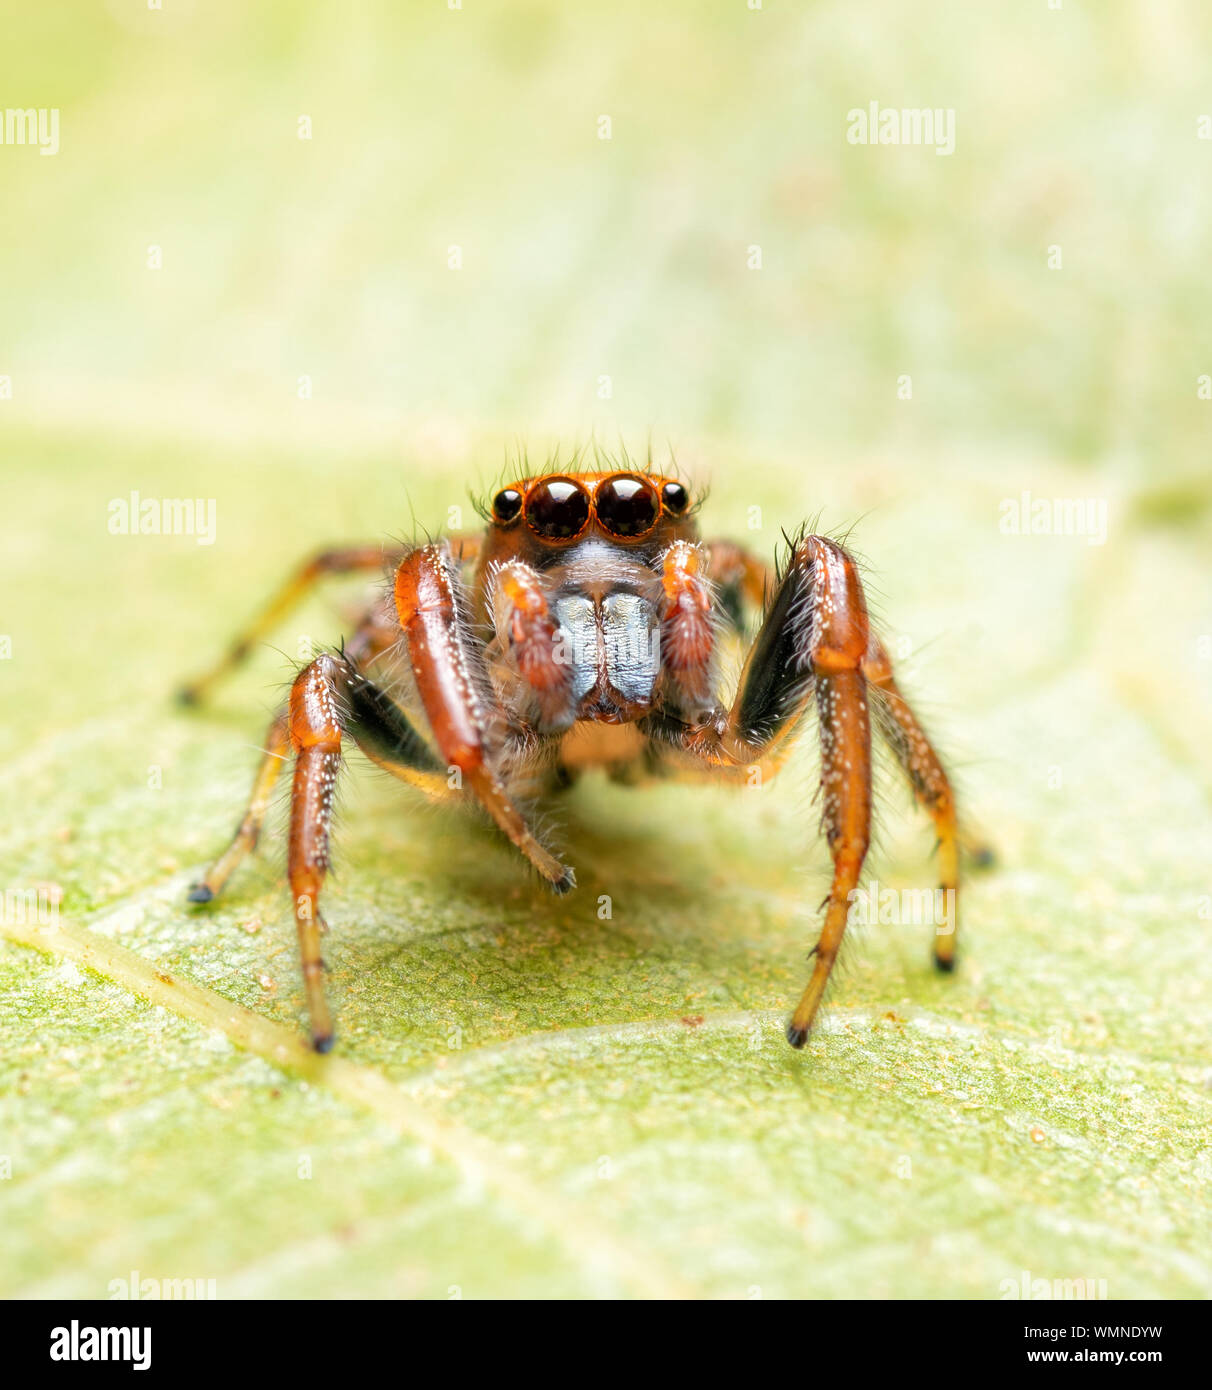 Beautiful Colonus sylvanus, Sylvana Jumping Spider  with his orange eyelashes looking up while resting on an Oak leaf Stock Photo